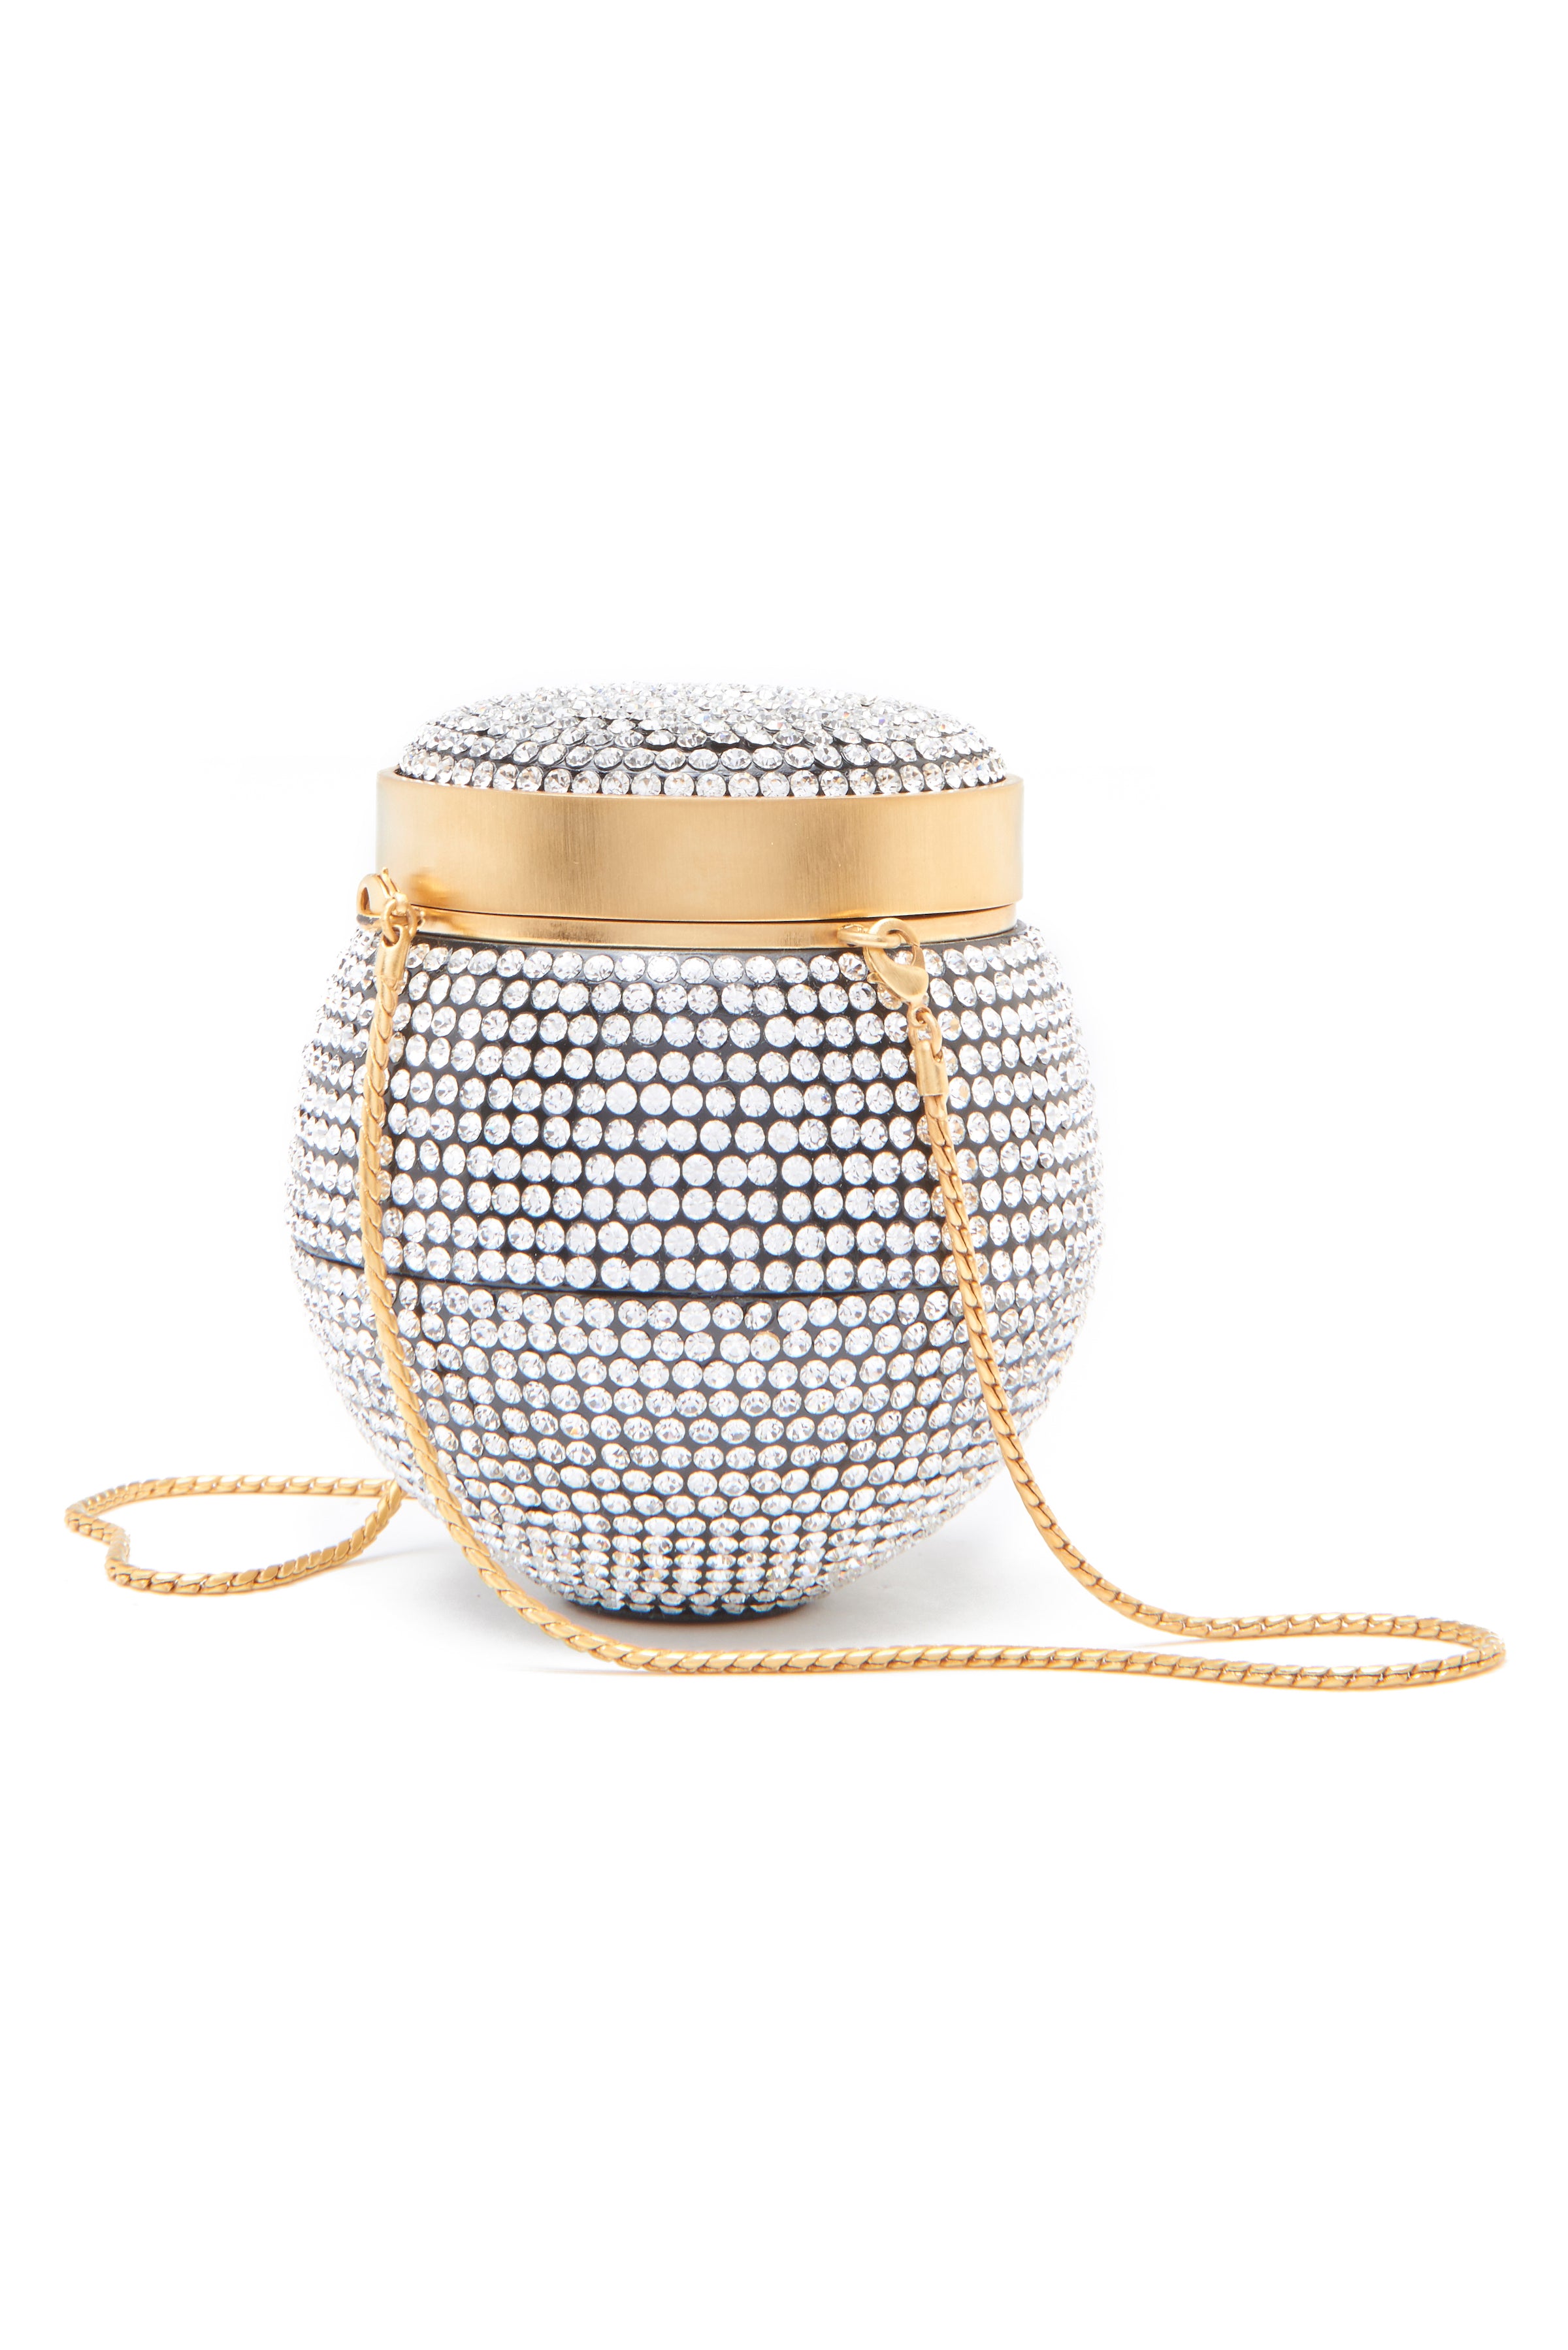 Chanel Satin Beaded Crystal Round Clutch Bag